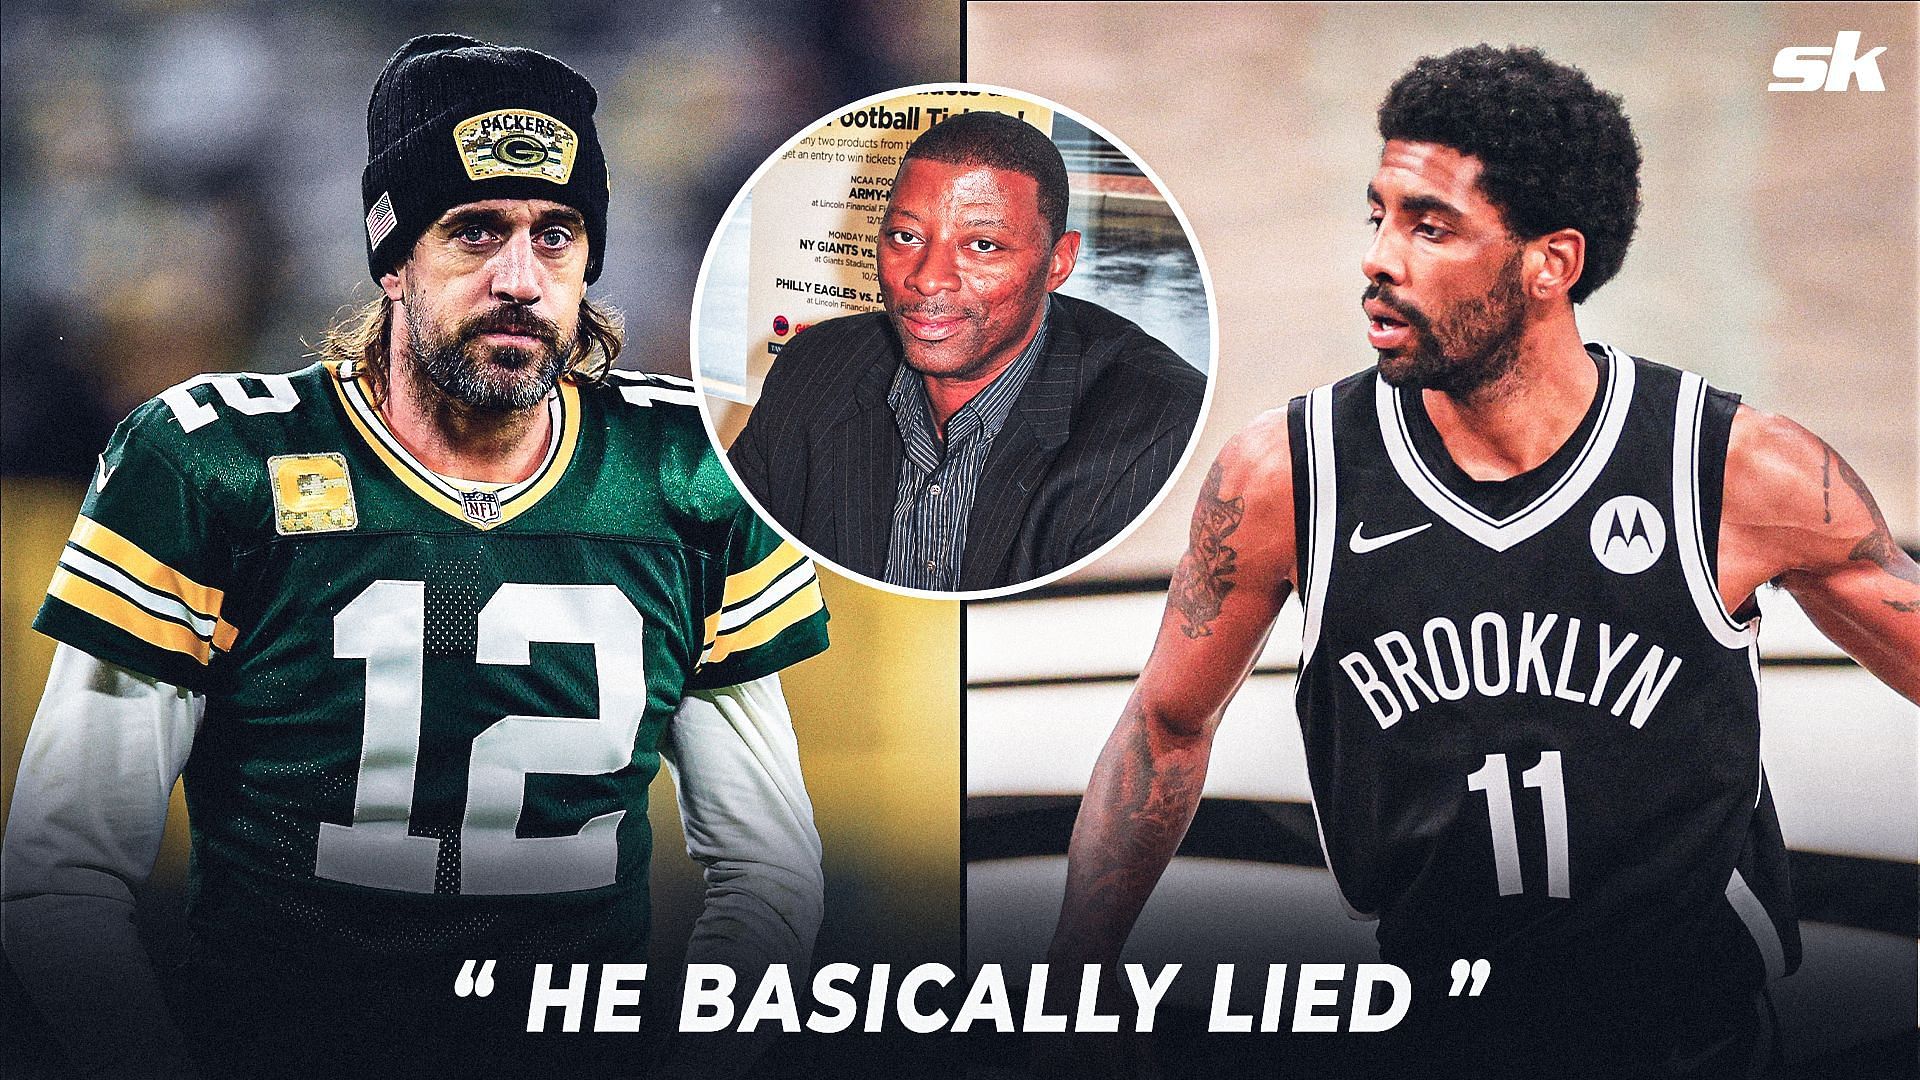 Carl Banks gives his take on Aaron Rodgers and Kyrie irving